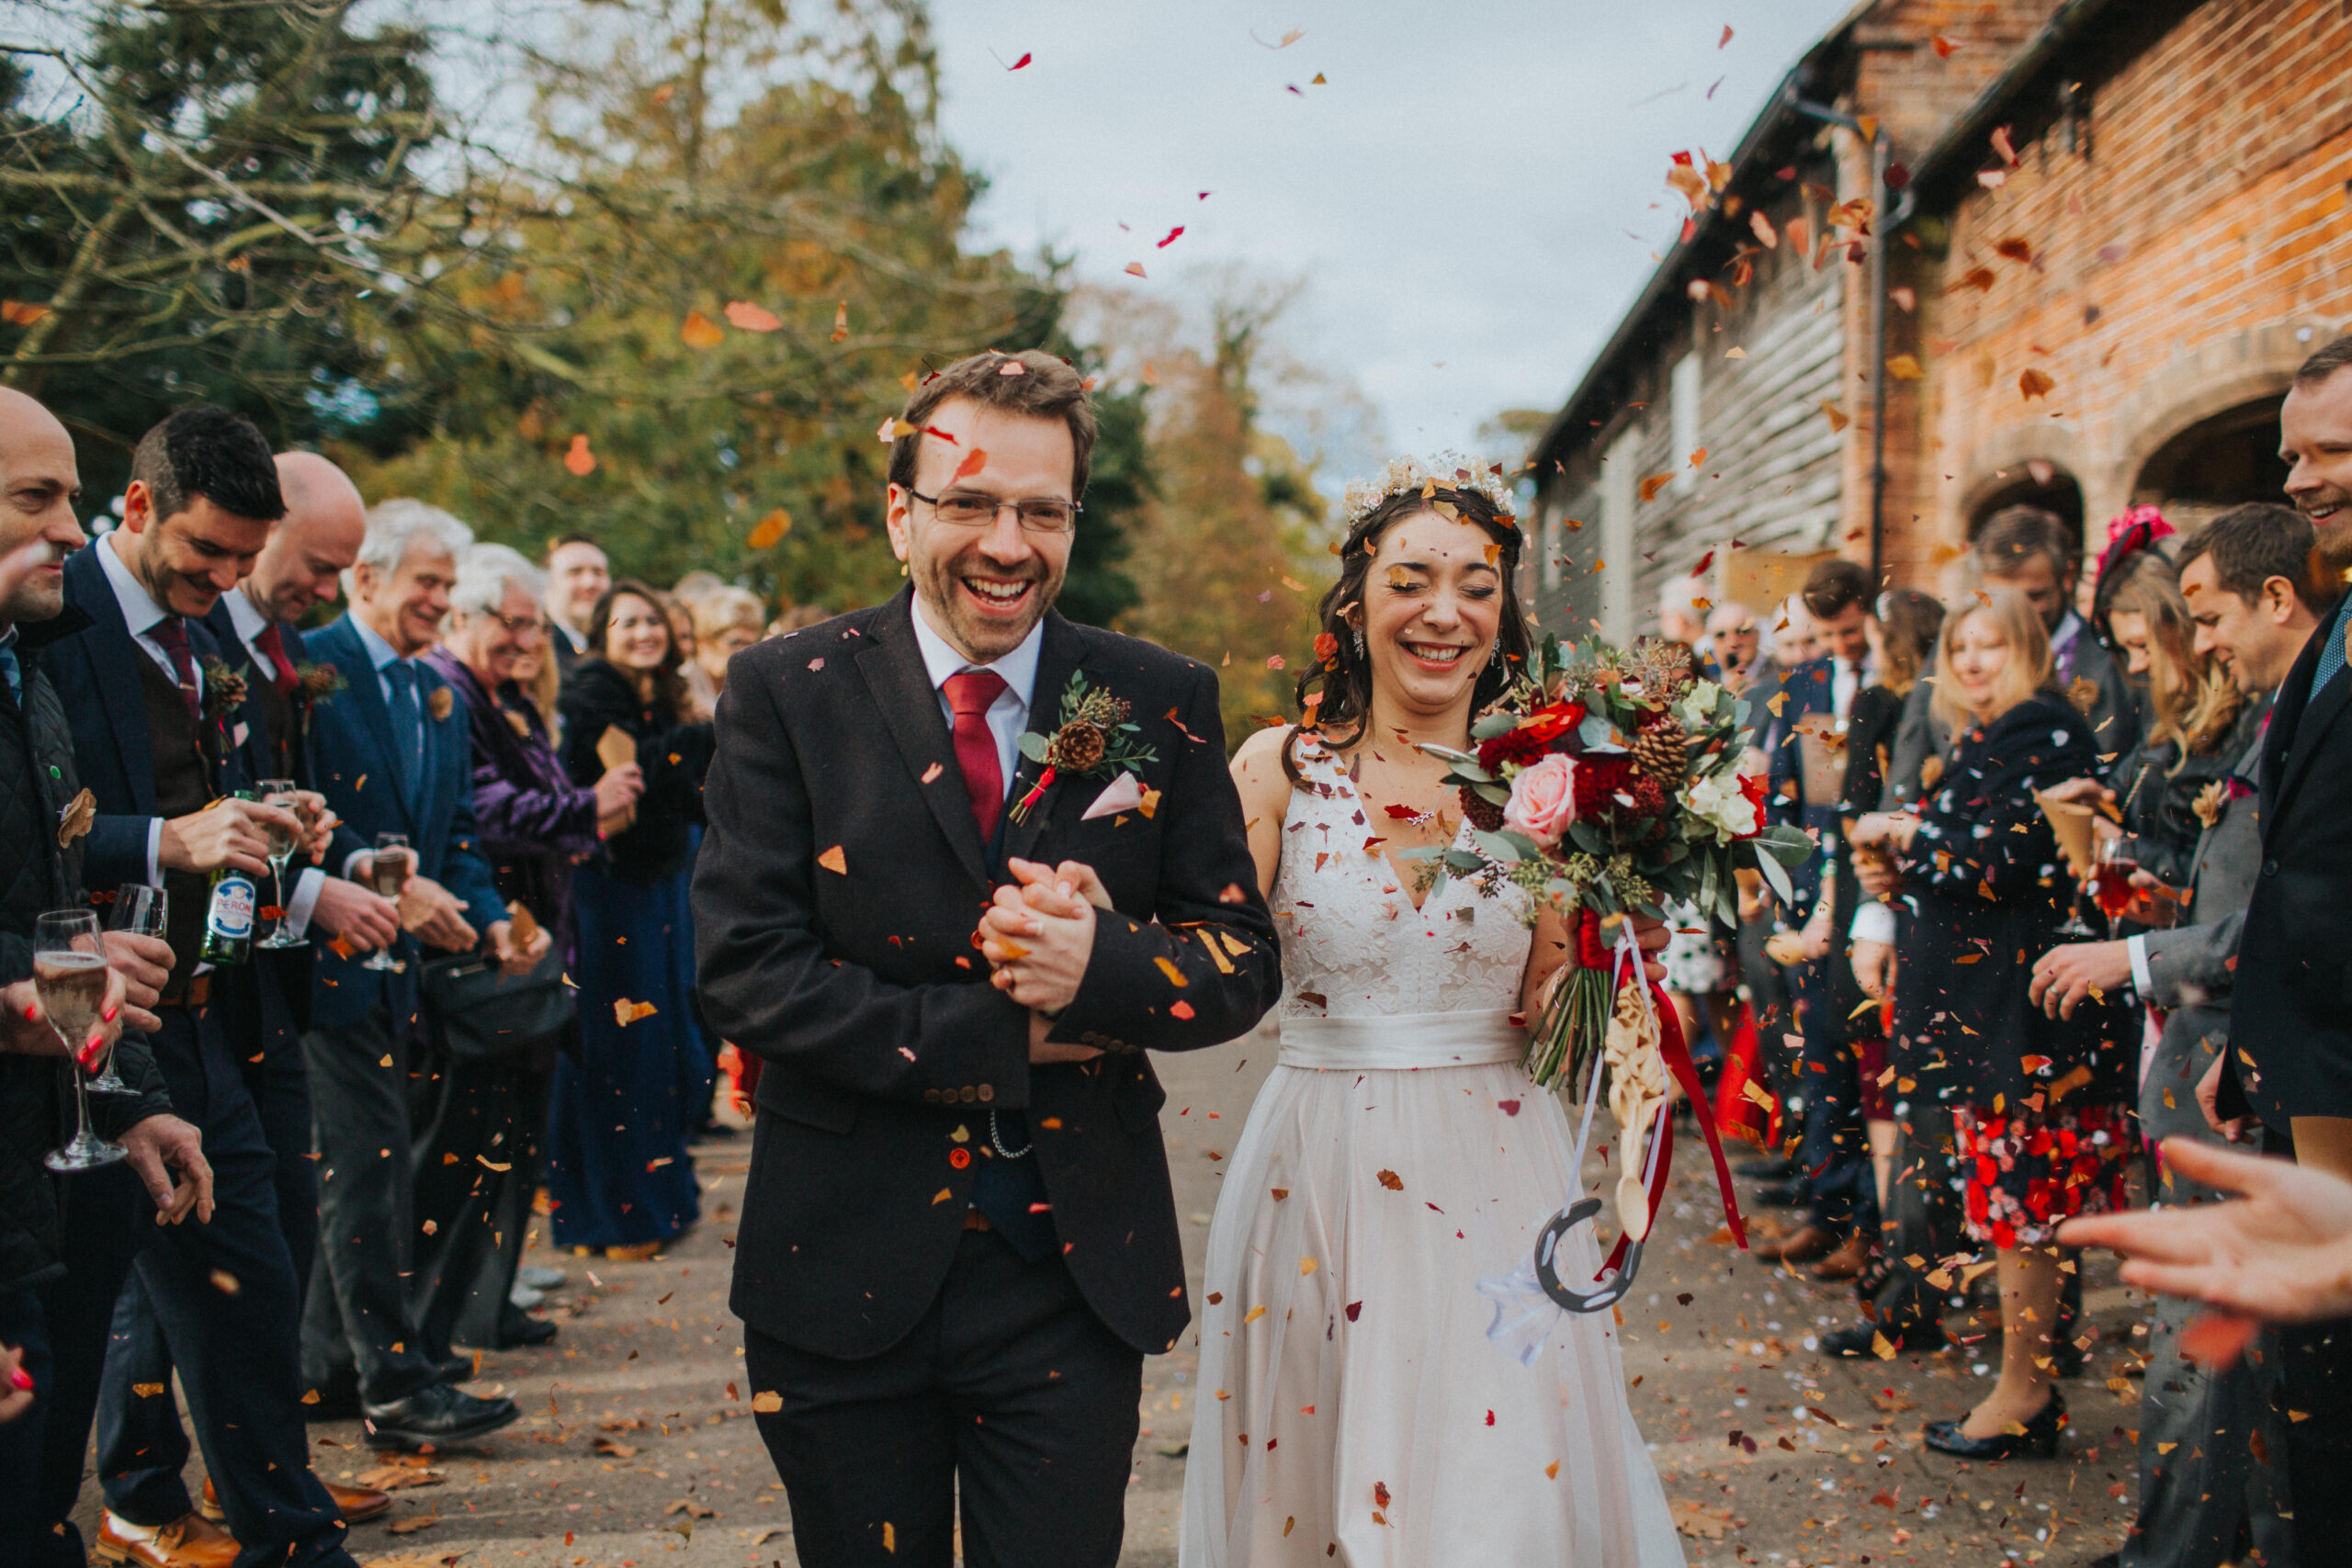 Bridal party embraces the warmth of fall at Shropshire venue